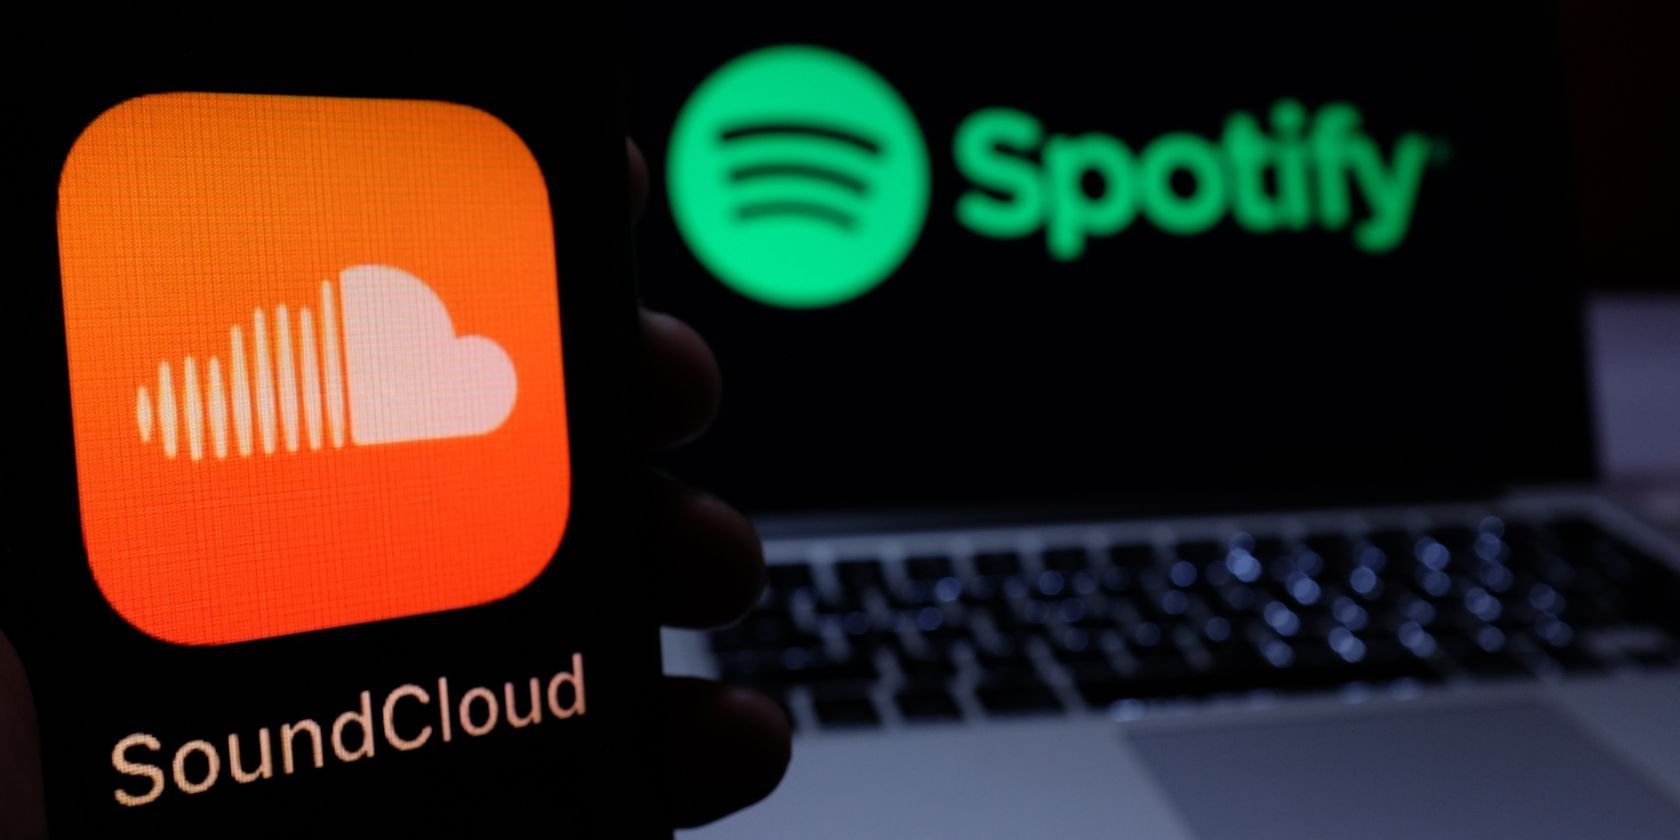 SoundCloud vs. Spotify: Which One Is Better?